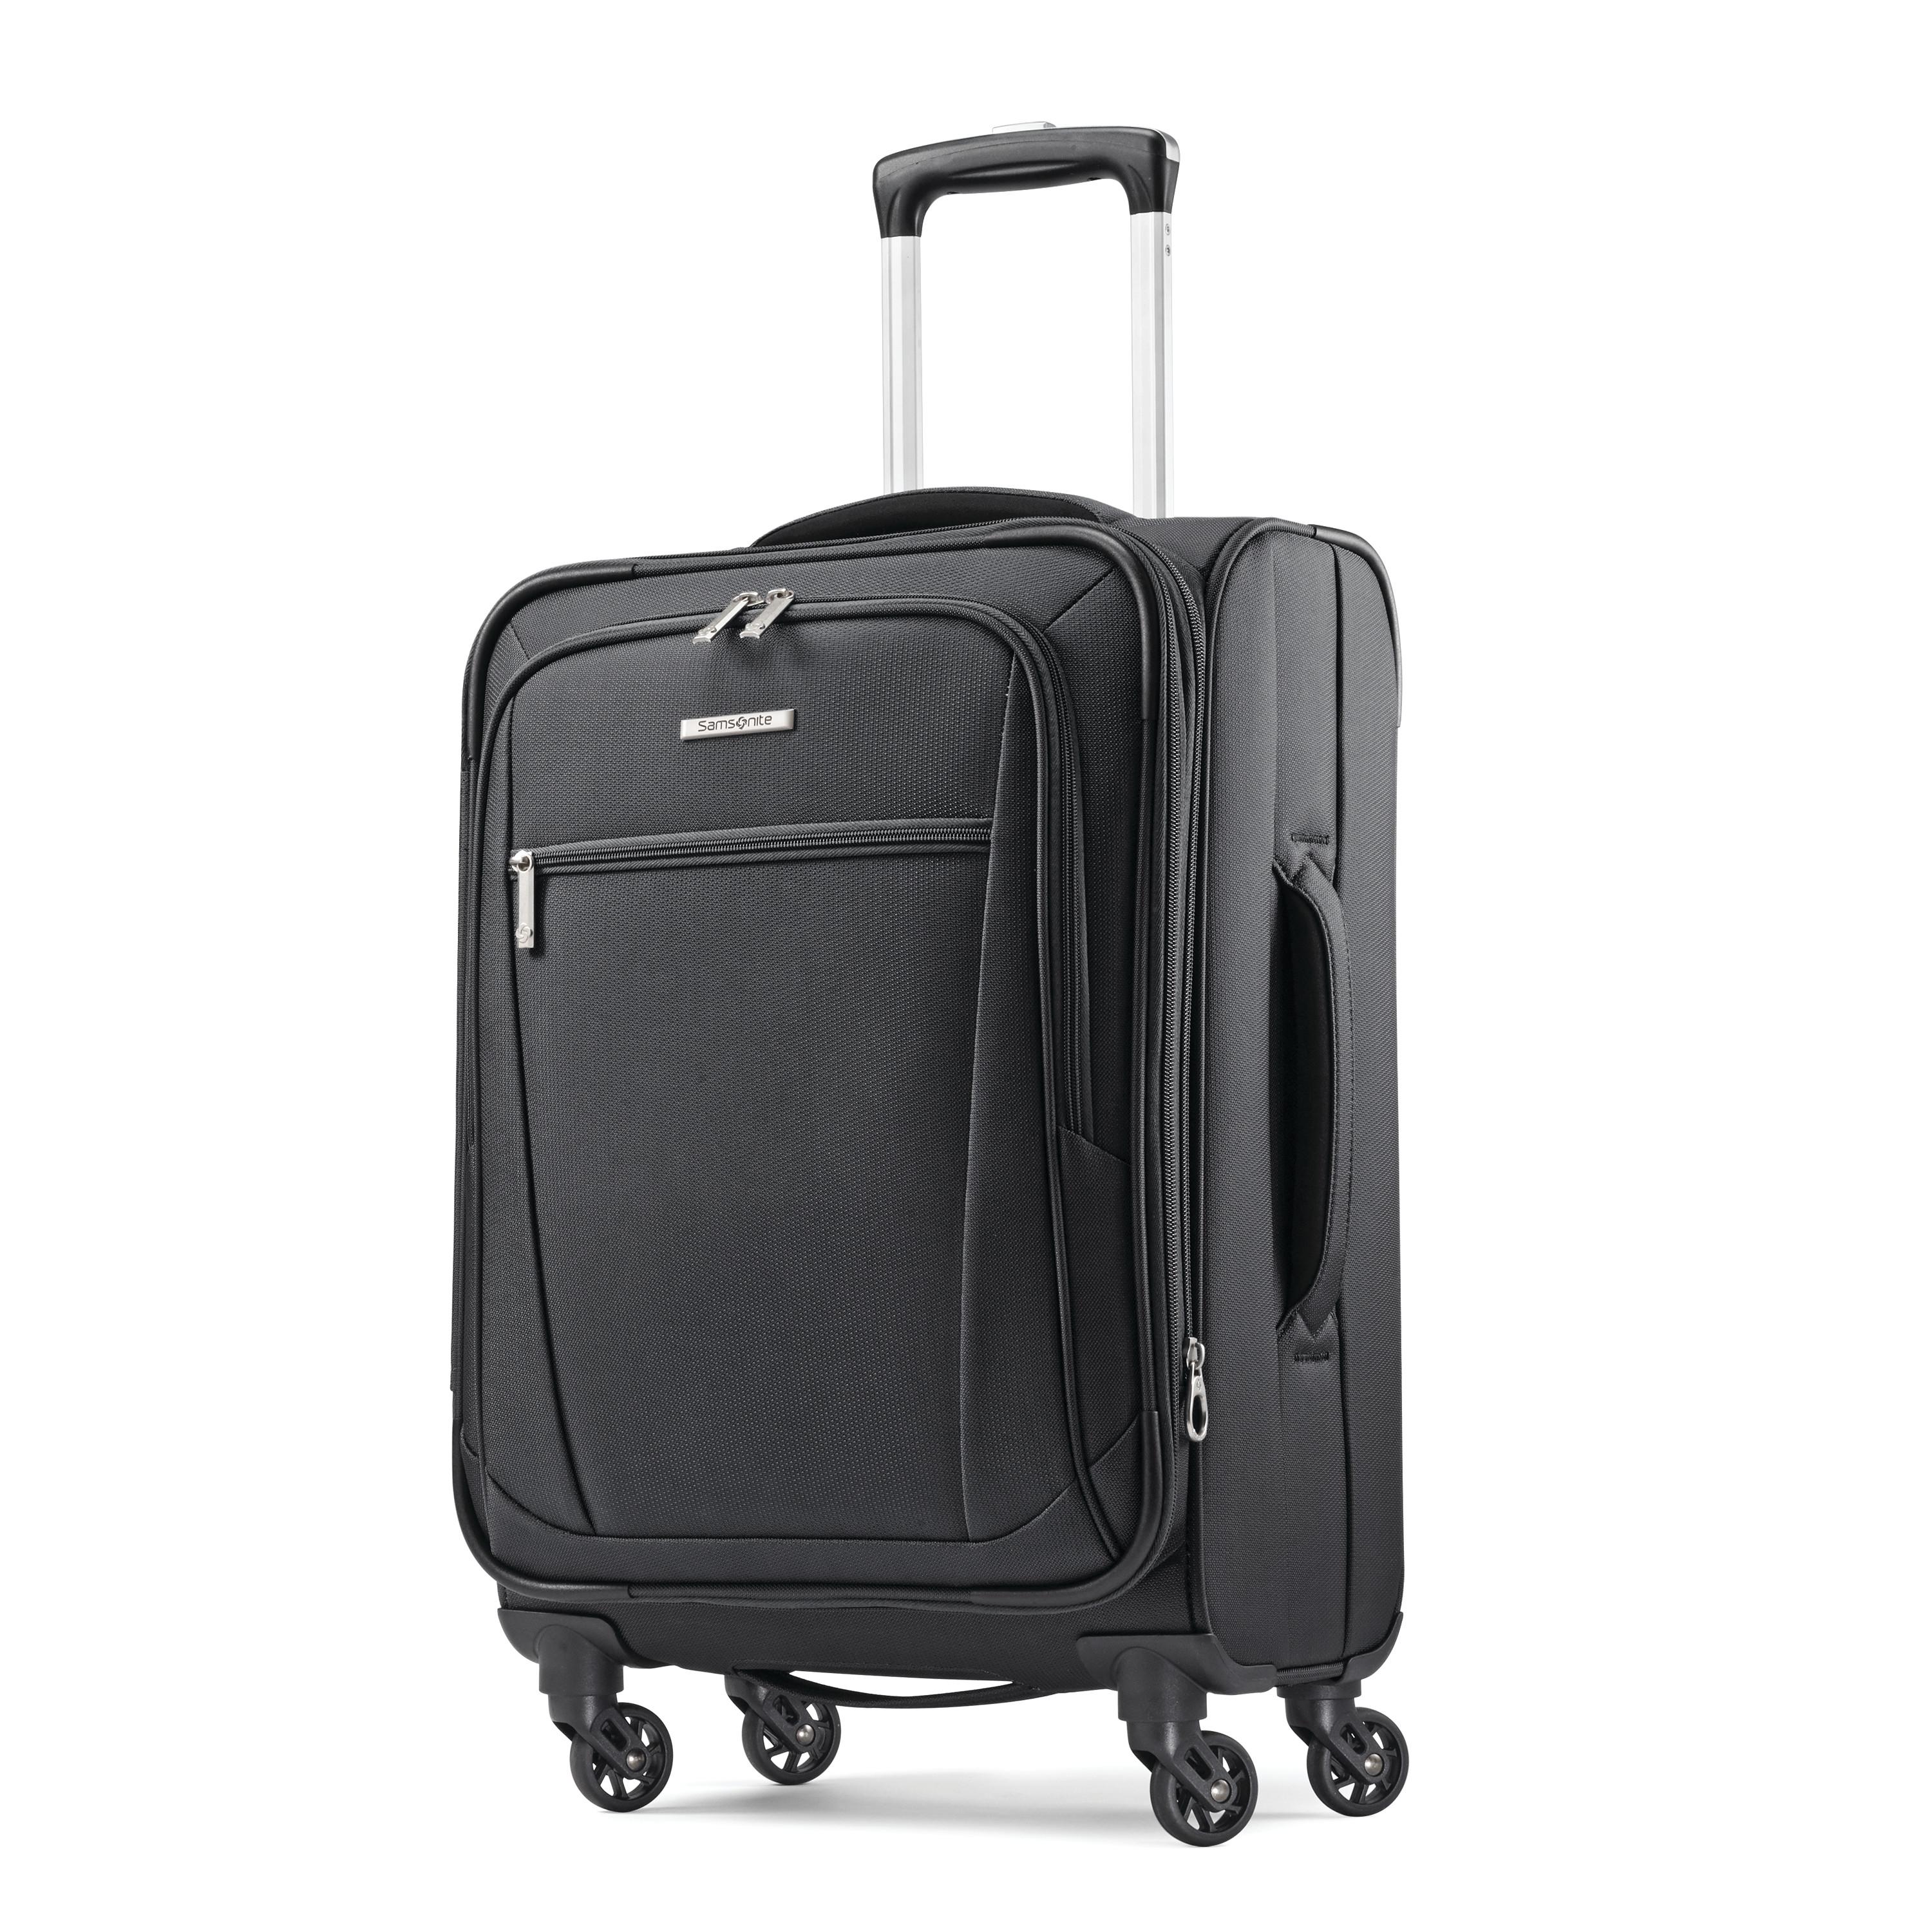 20in Samsonite Ascella I Carry-On Spinner Luggage for $63.99 Shipped